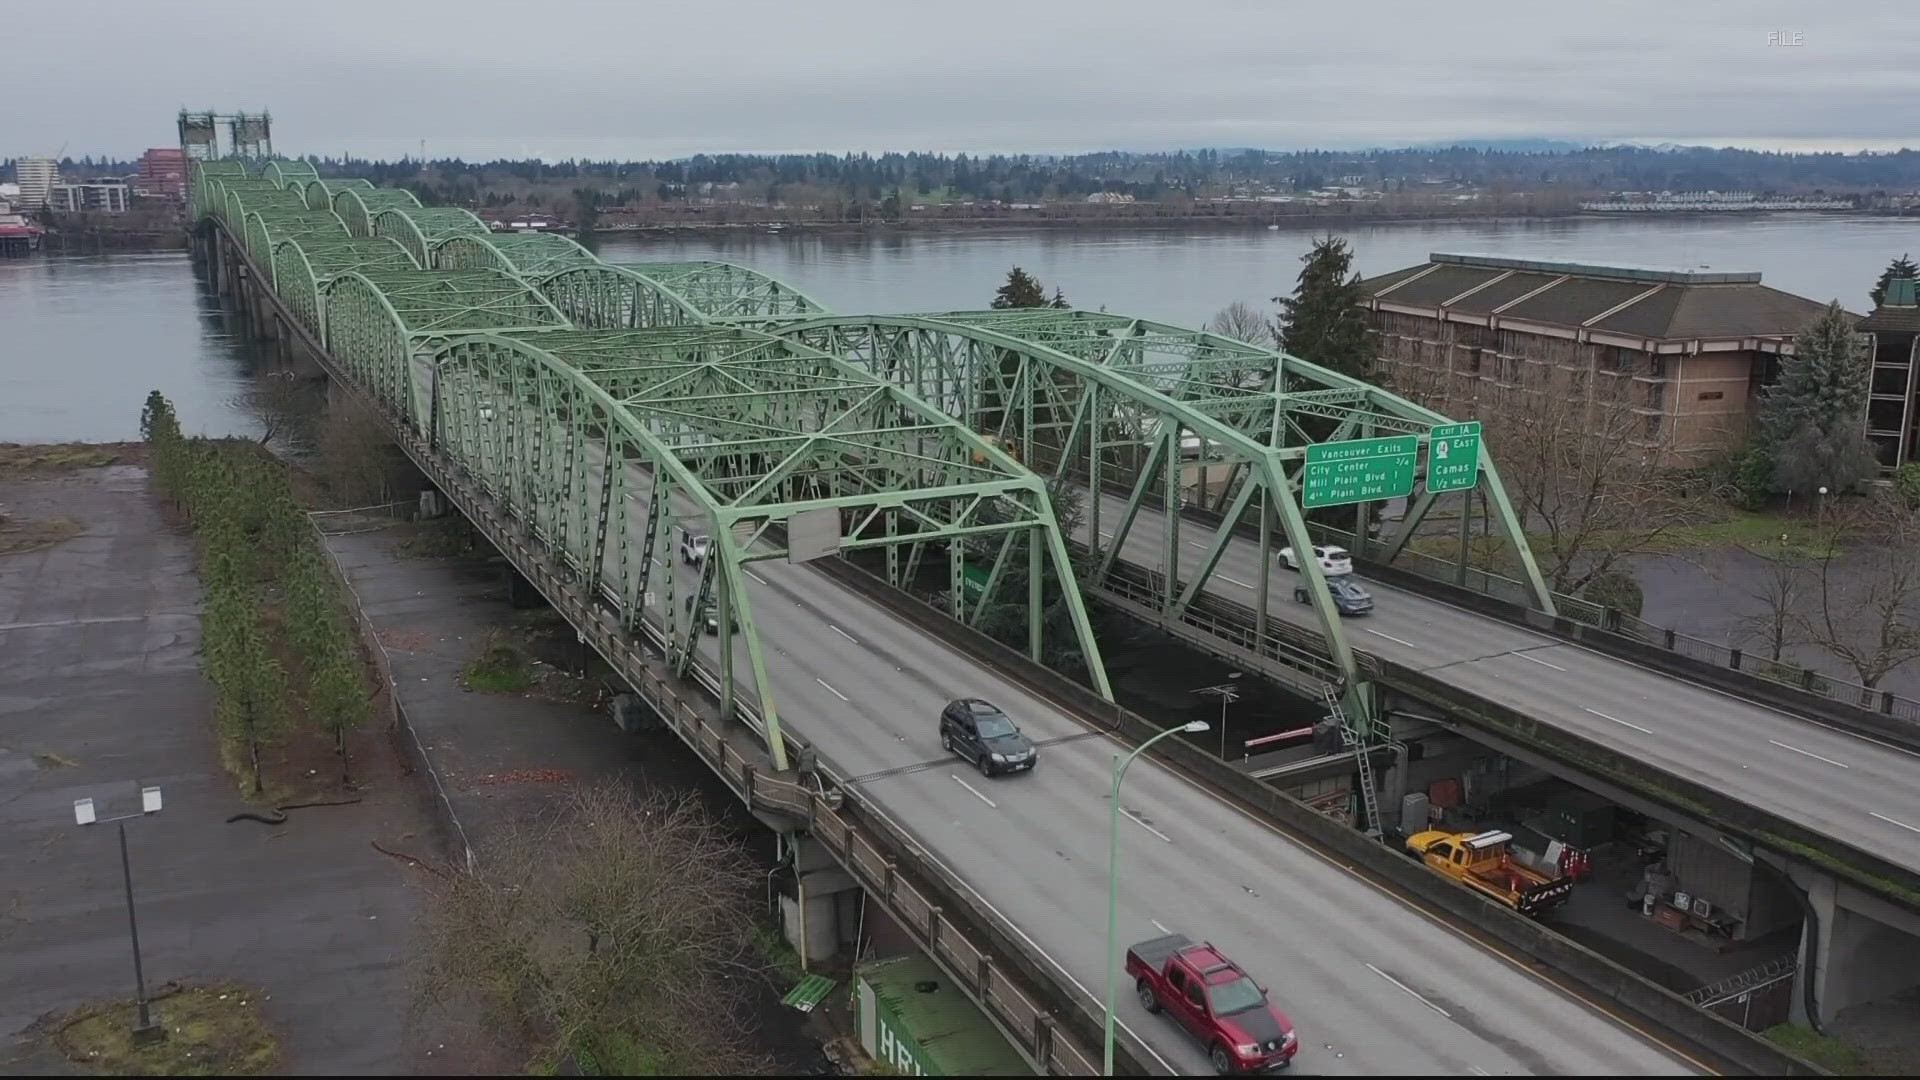 The federal review process is taking longer than originally expected, potentially pushing back the construction timeline. But tolling on the old bridge may go ahead.